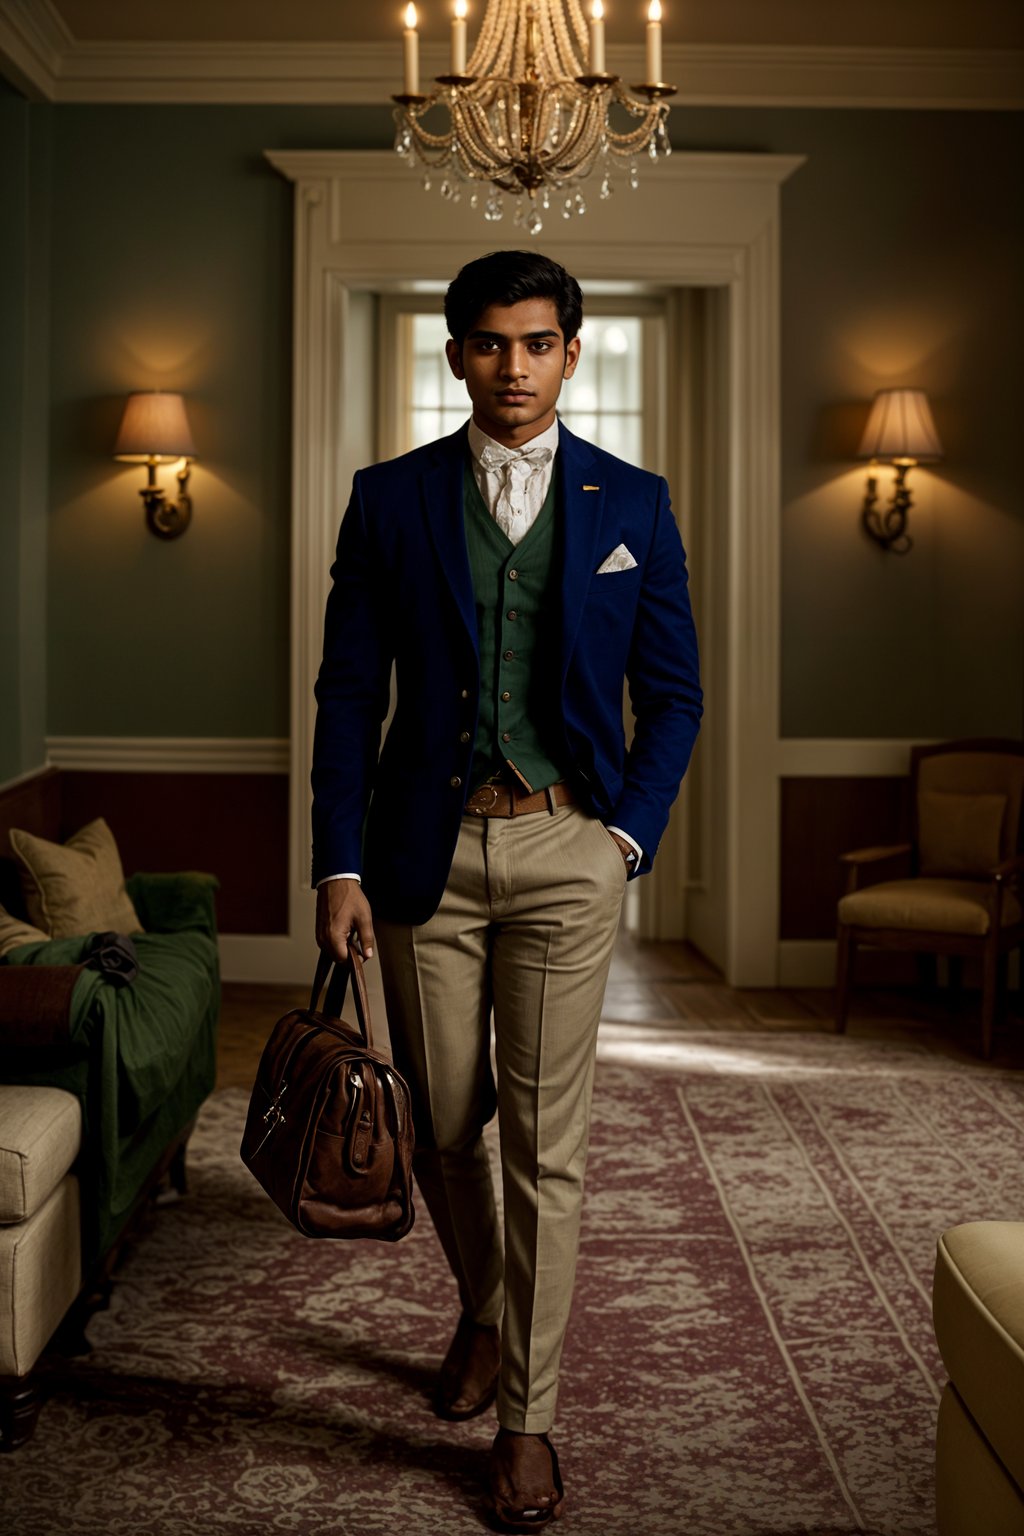 a man in preppy style, old money aesthetic, posh style, elite school stlye, luxurious style, gossip girl neo-prep style, ralph lauren style, country club style, ivy league style